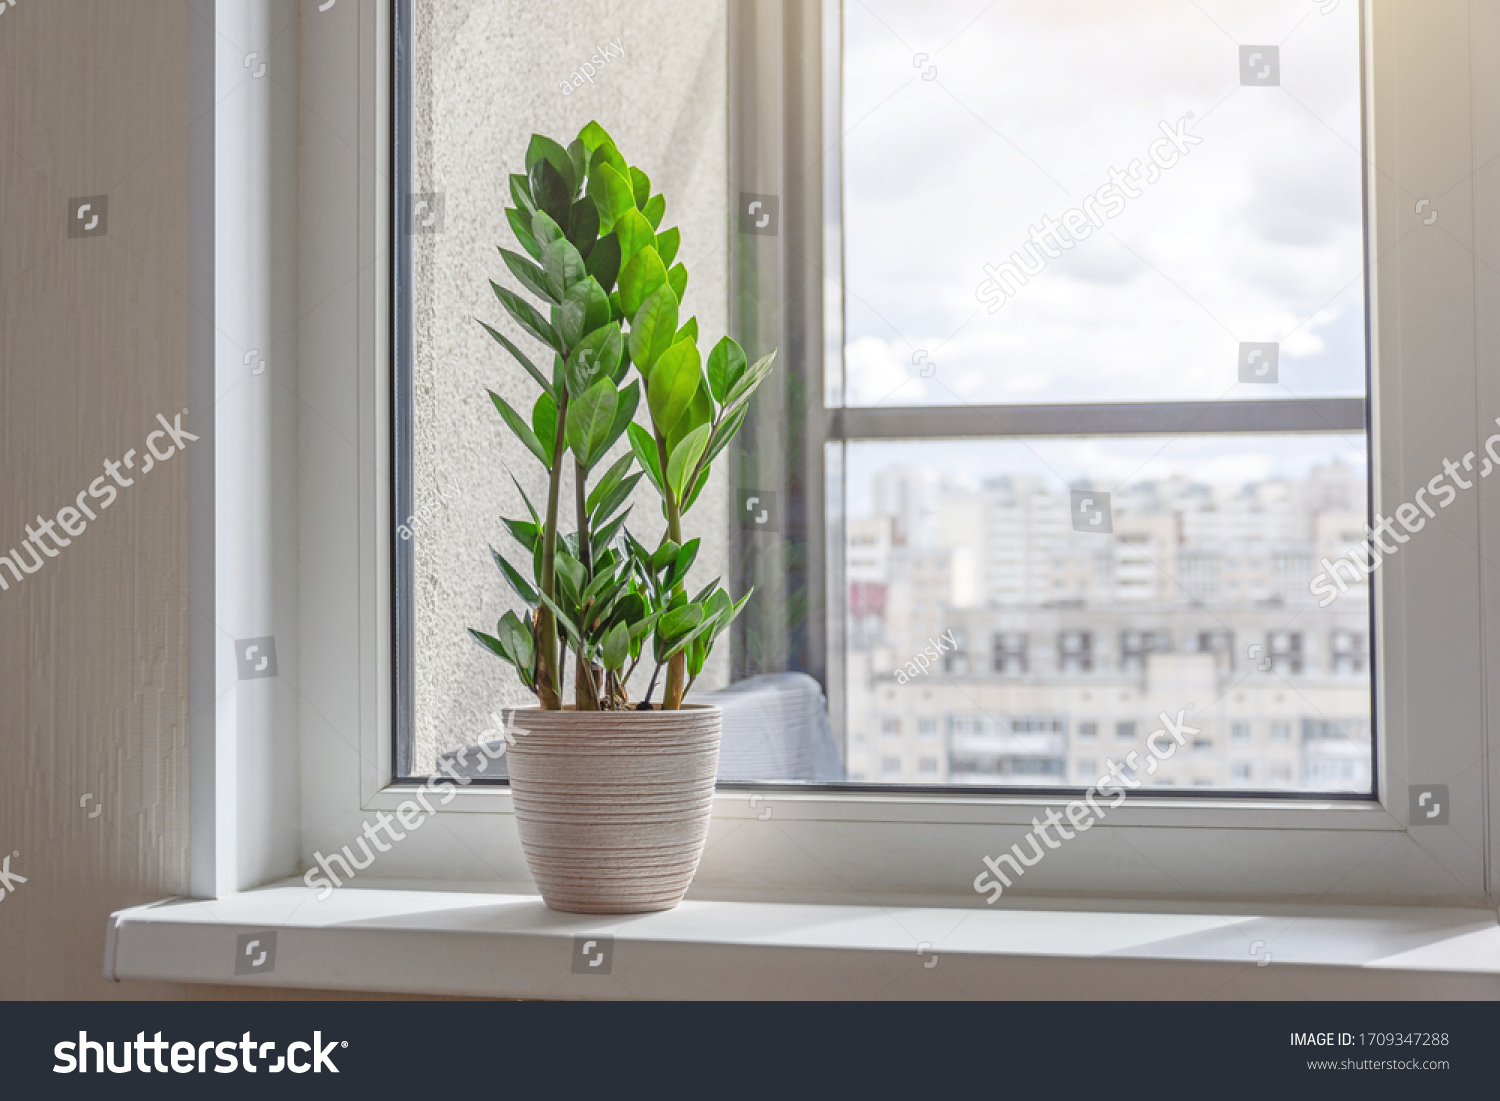 Green Zamioculcas plant on the windowsill of a sunlit room, in the distance the urban background, many residential buildings #1709347288